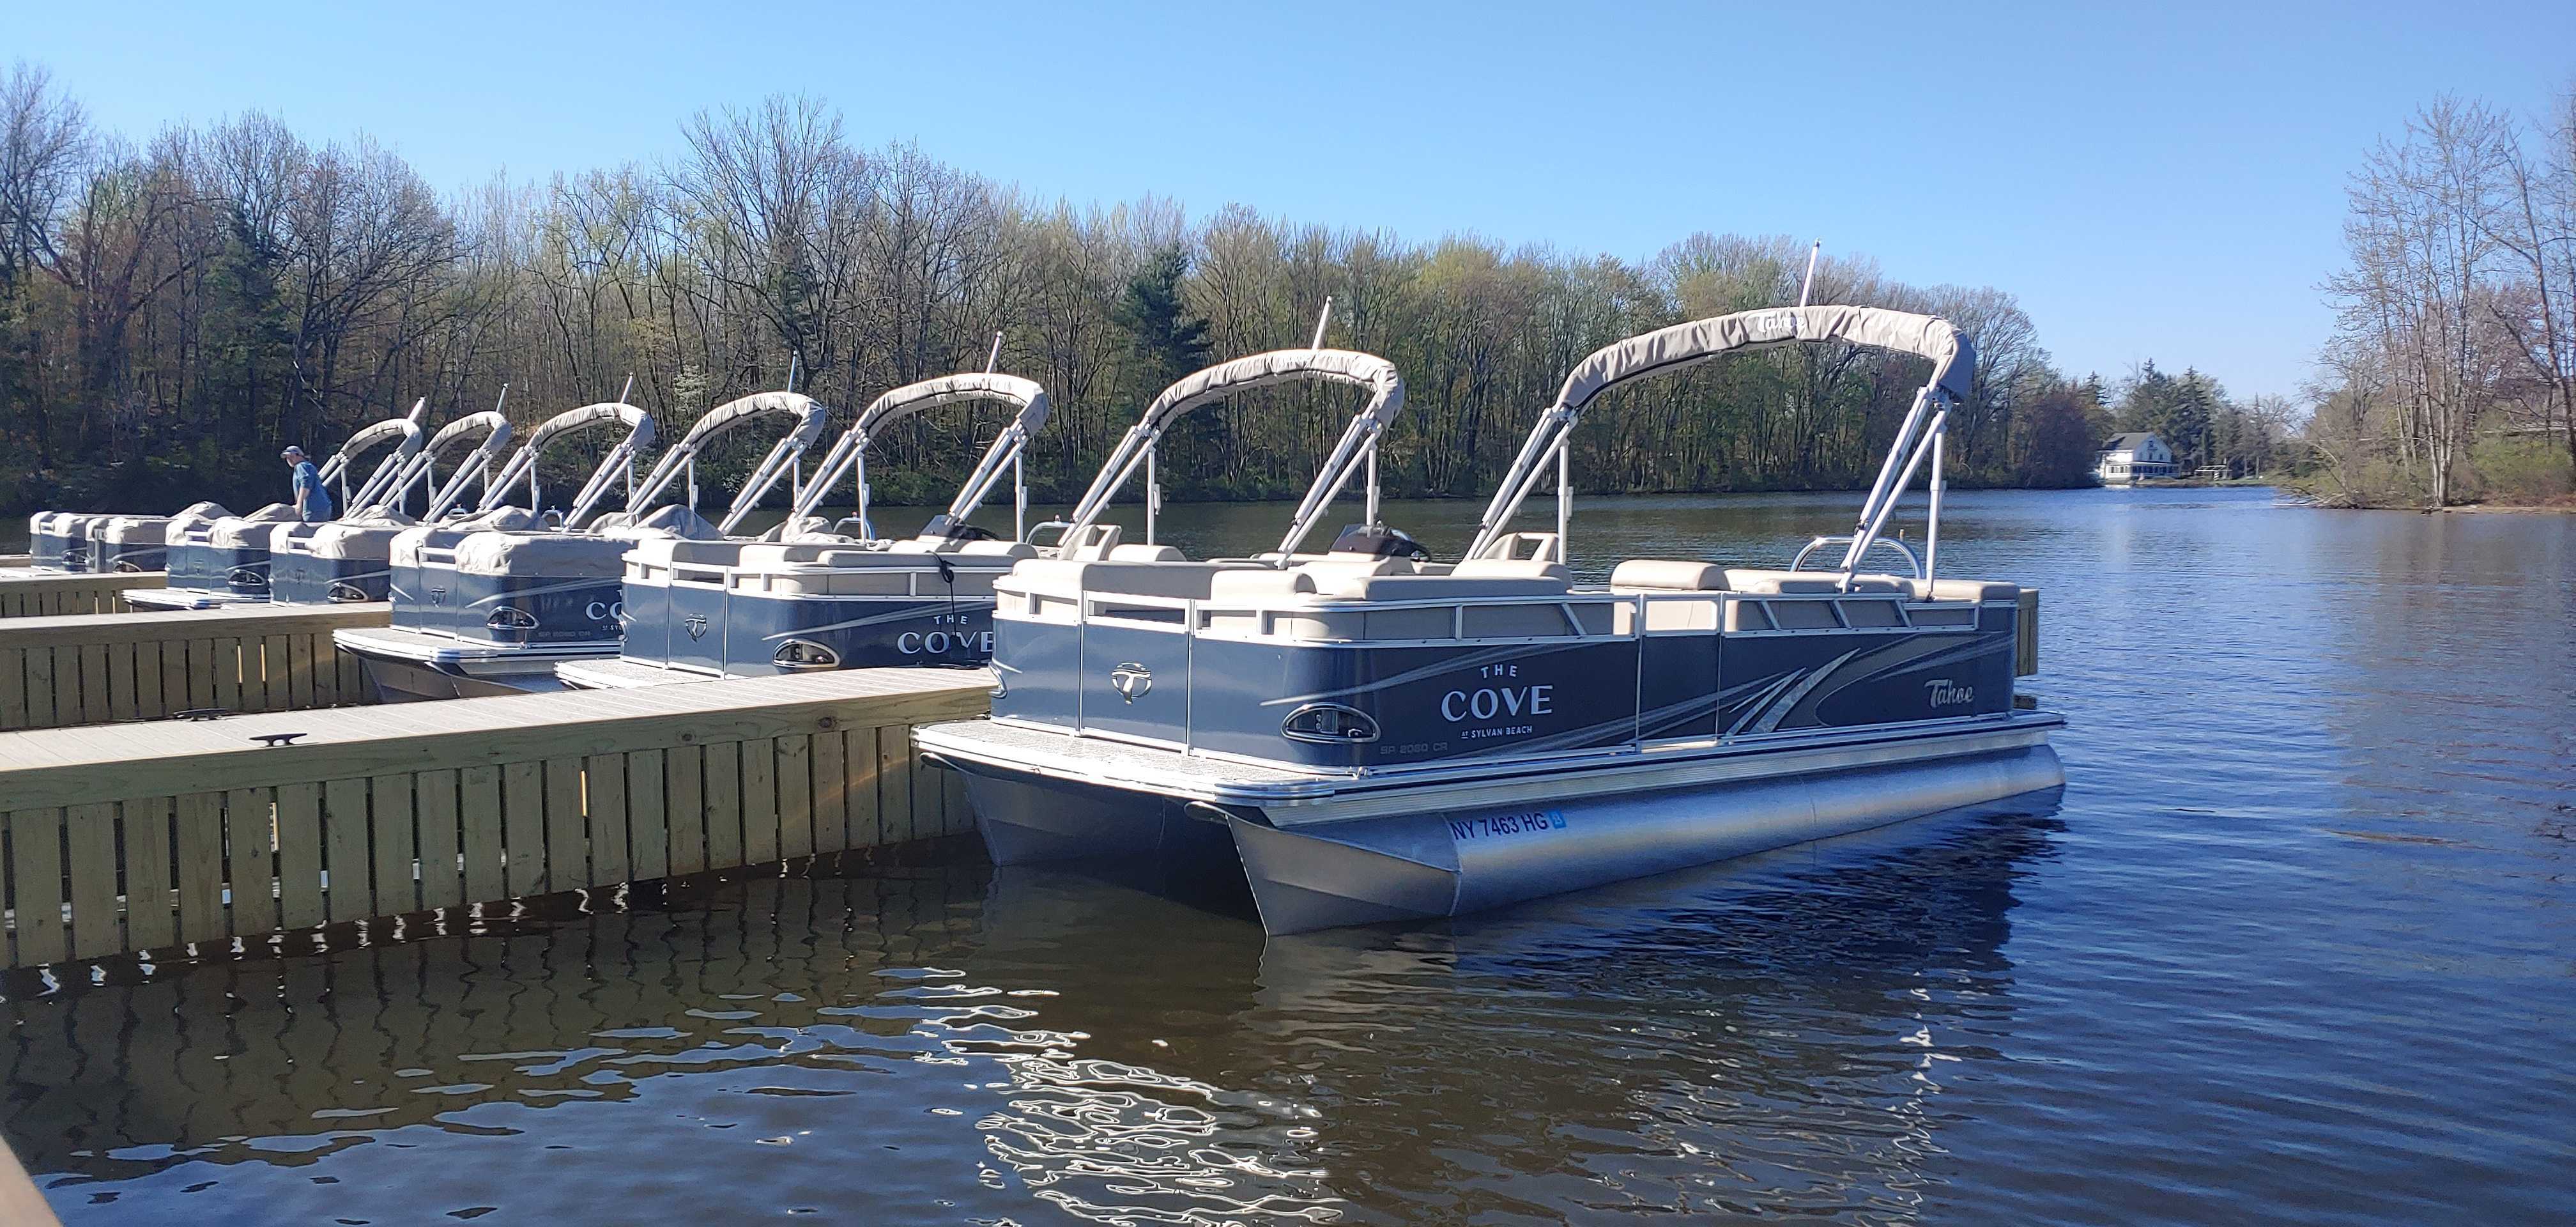 Sylvan Beach Supply Co. offers rentals for lake activities, including pontoon boats